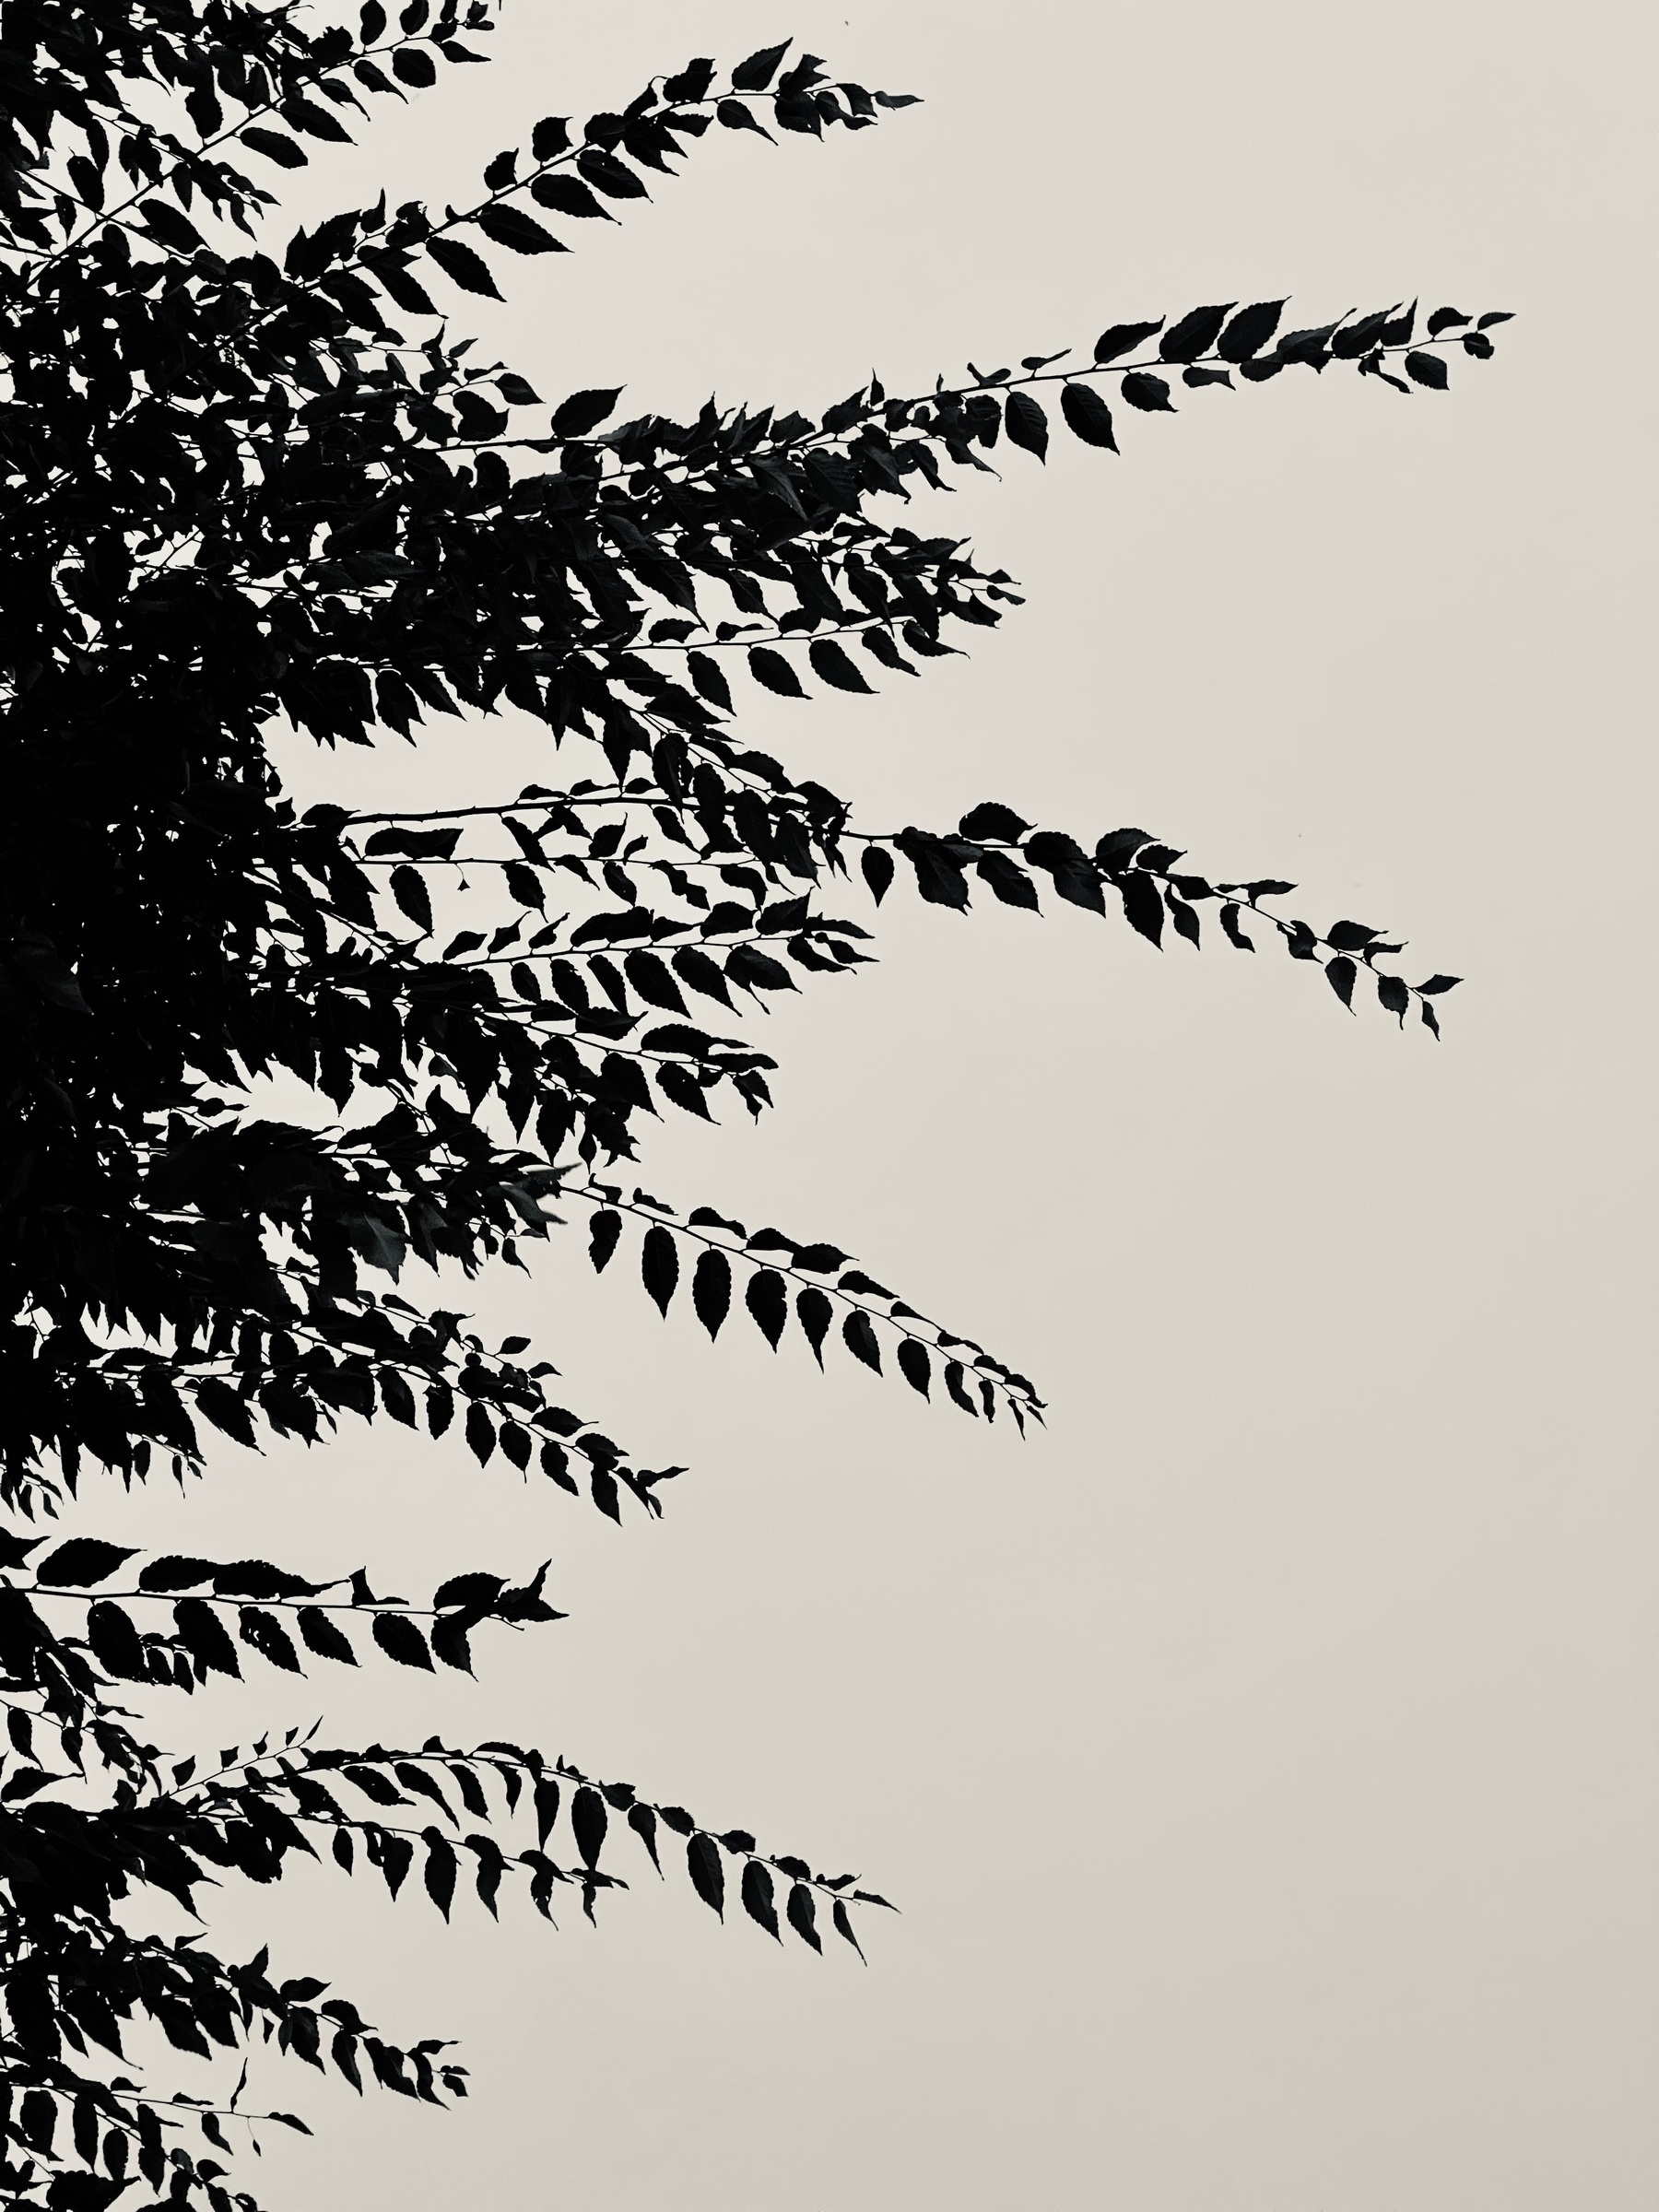 Branches and leaves silhouetted against a cloudy sky. 